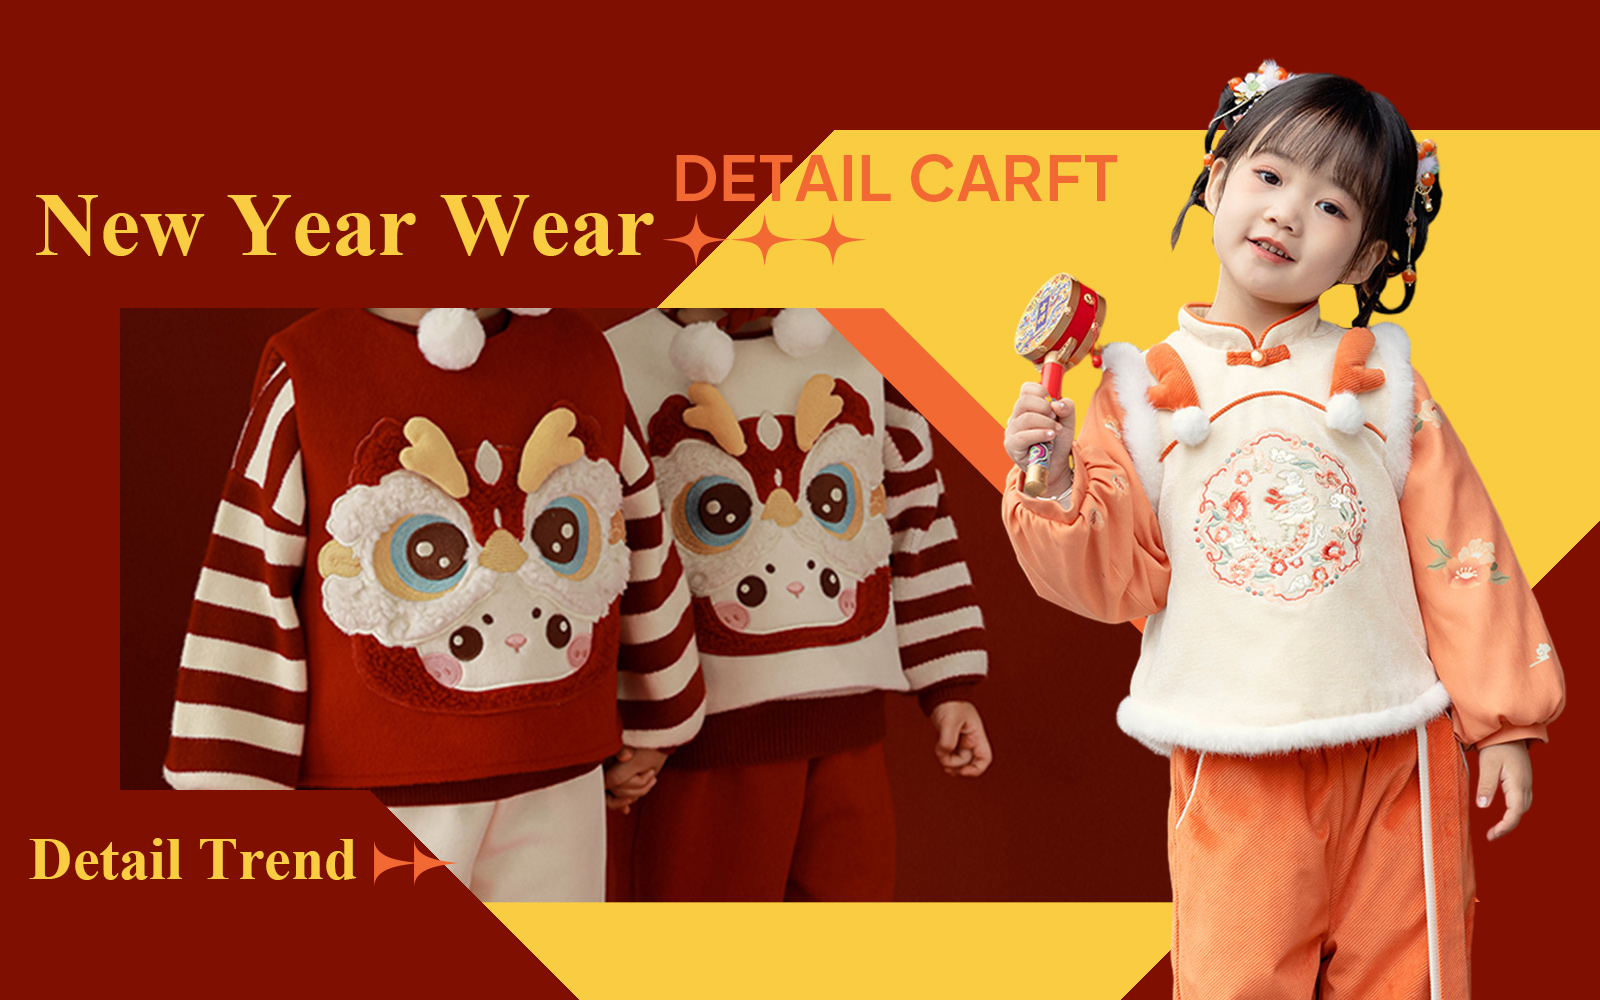 New Year Wear -- The Detail & Craft Trend for Kidswear